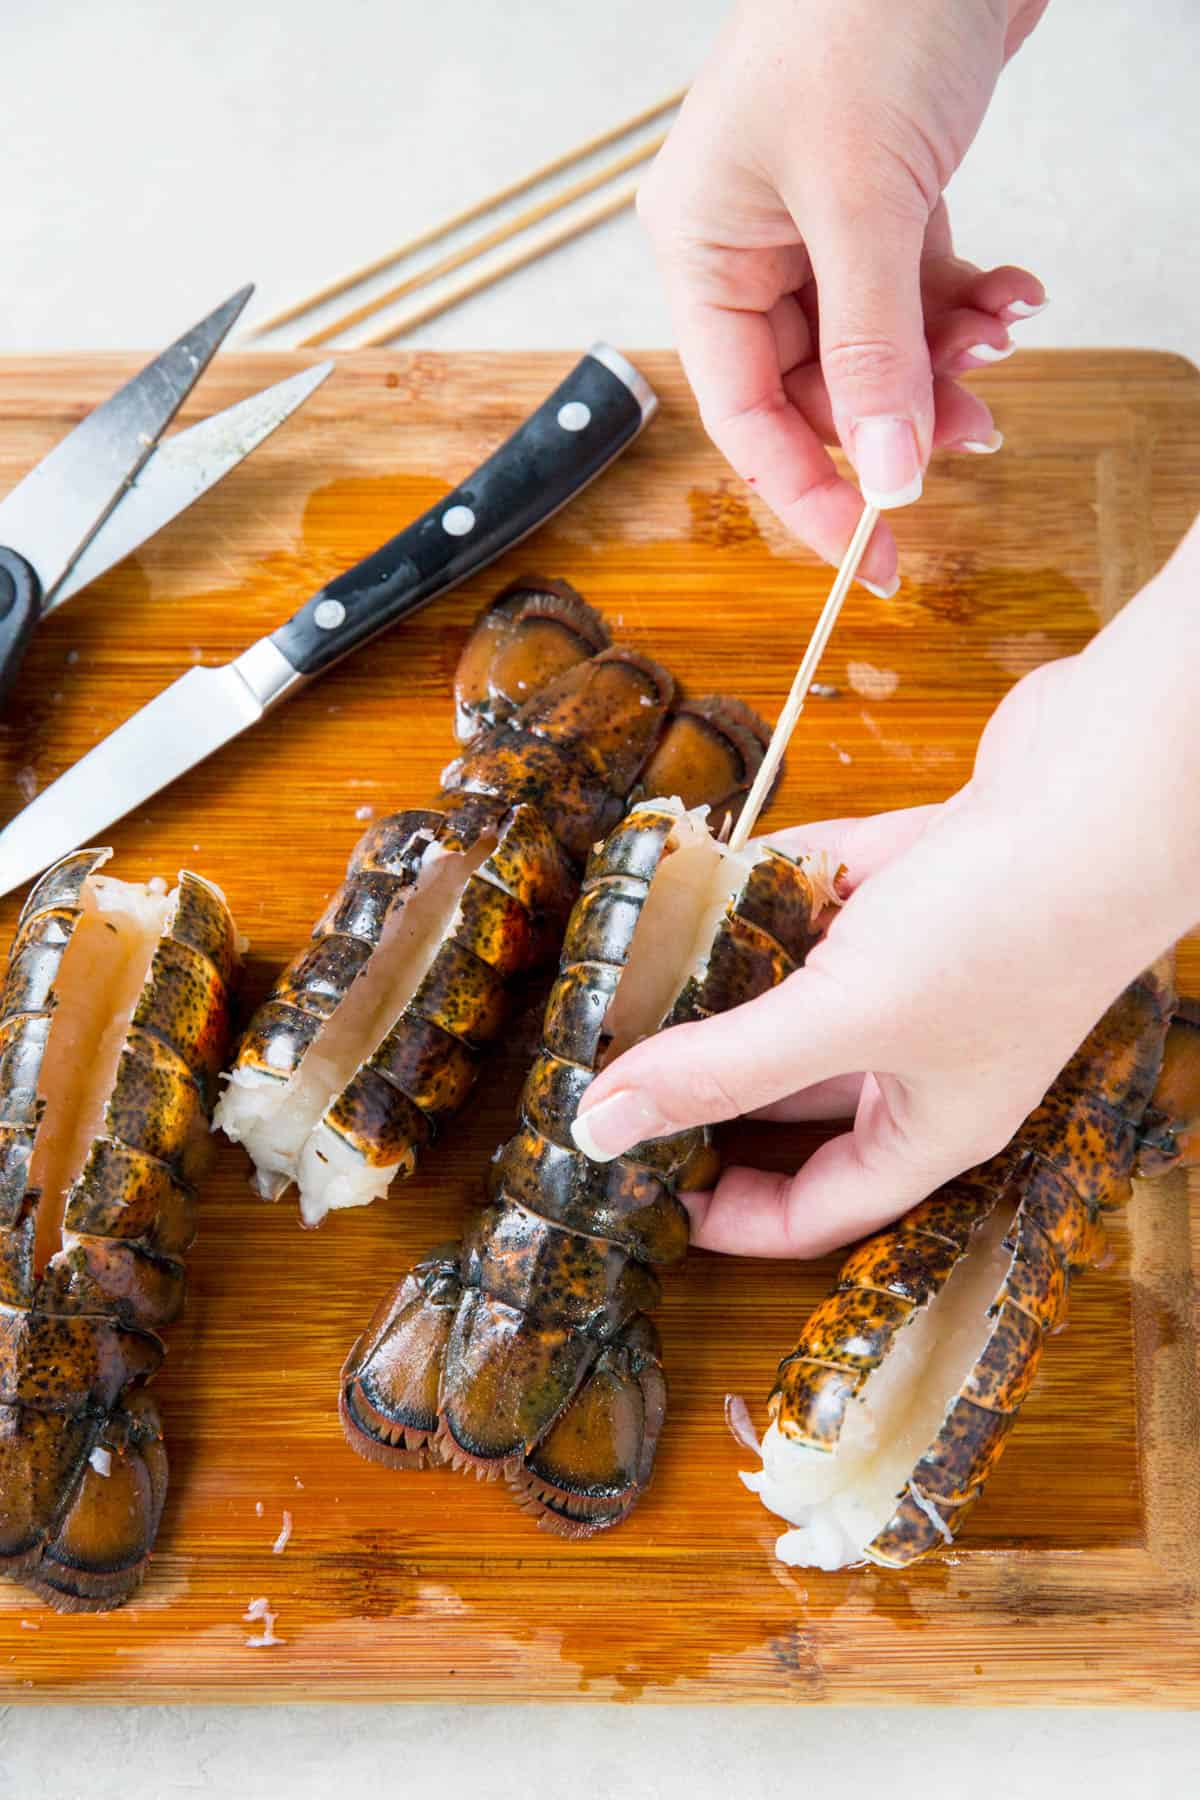 Inserting wooden skewers into lobster tails.